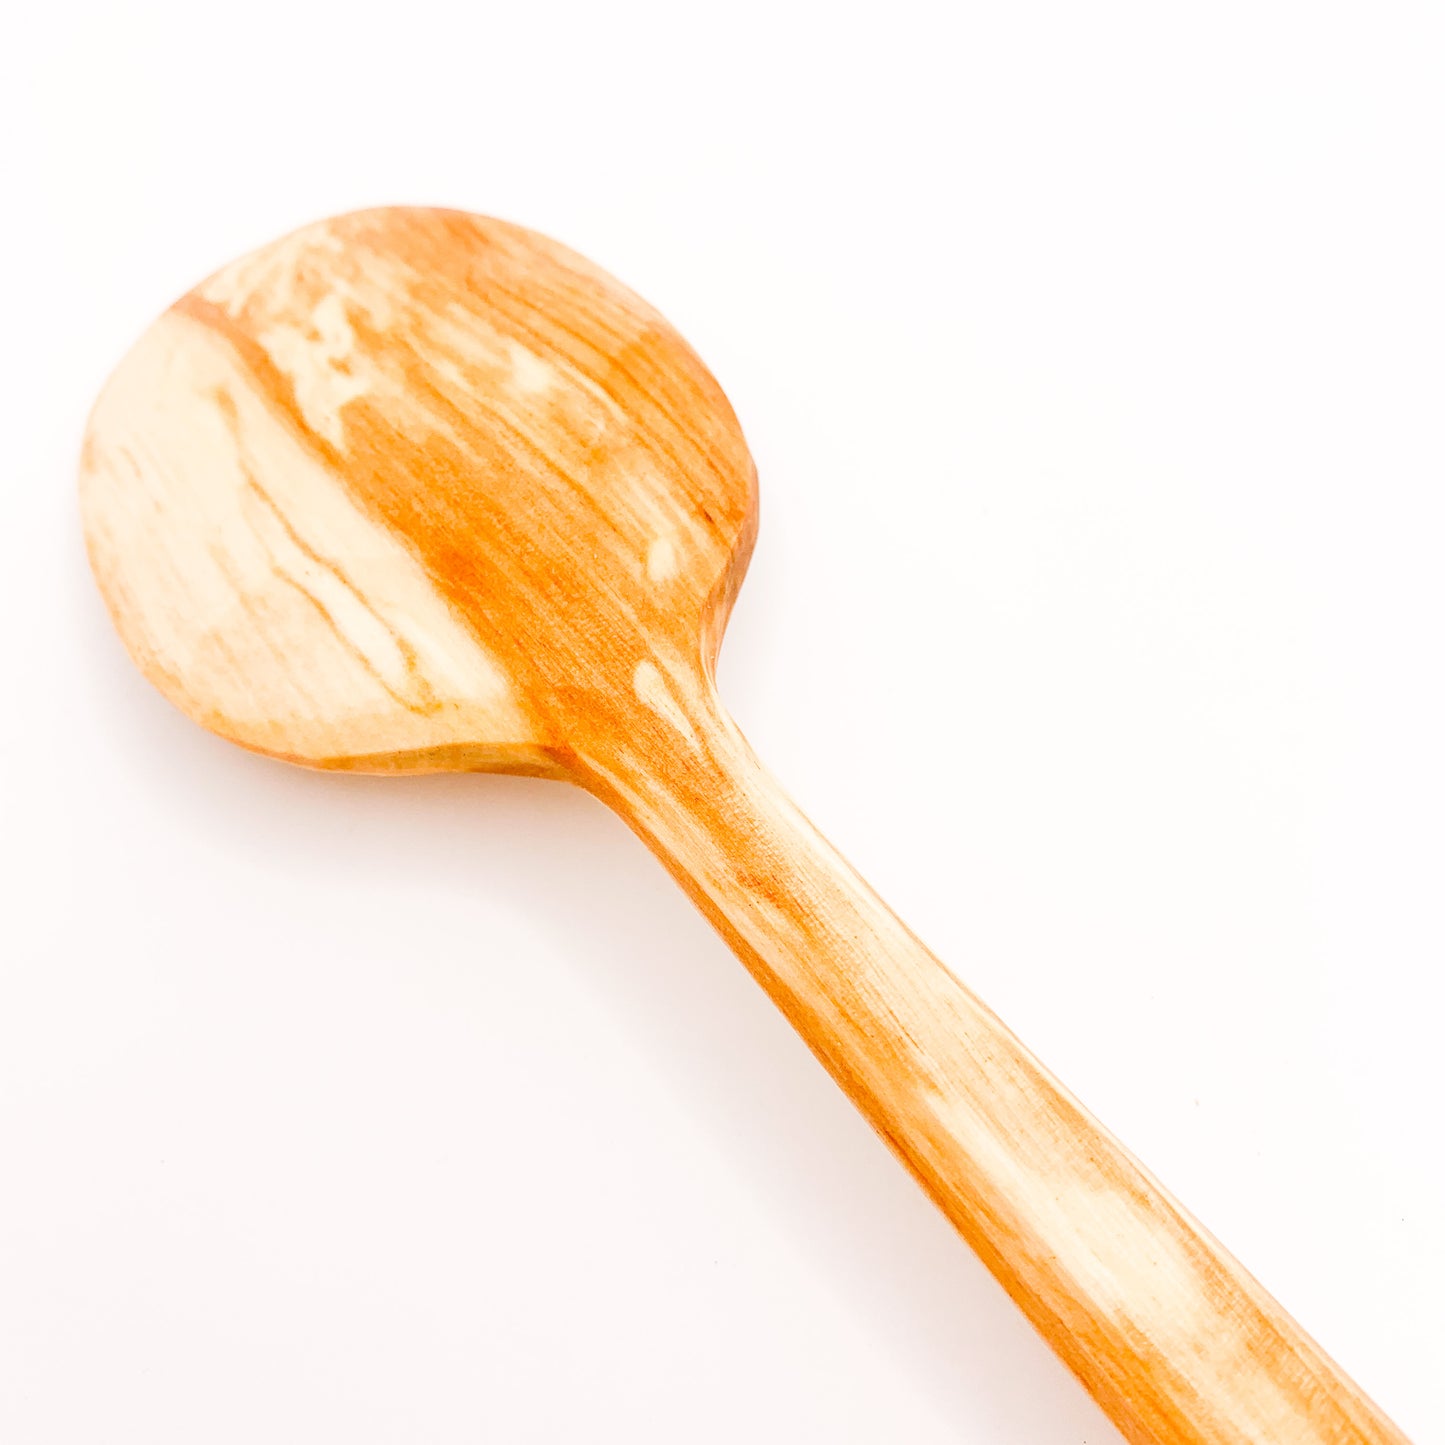 Hand-Carved Large Wooden Serving Spoon - Heavy Gretel